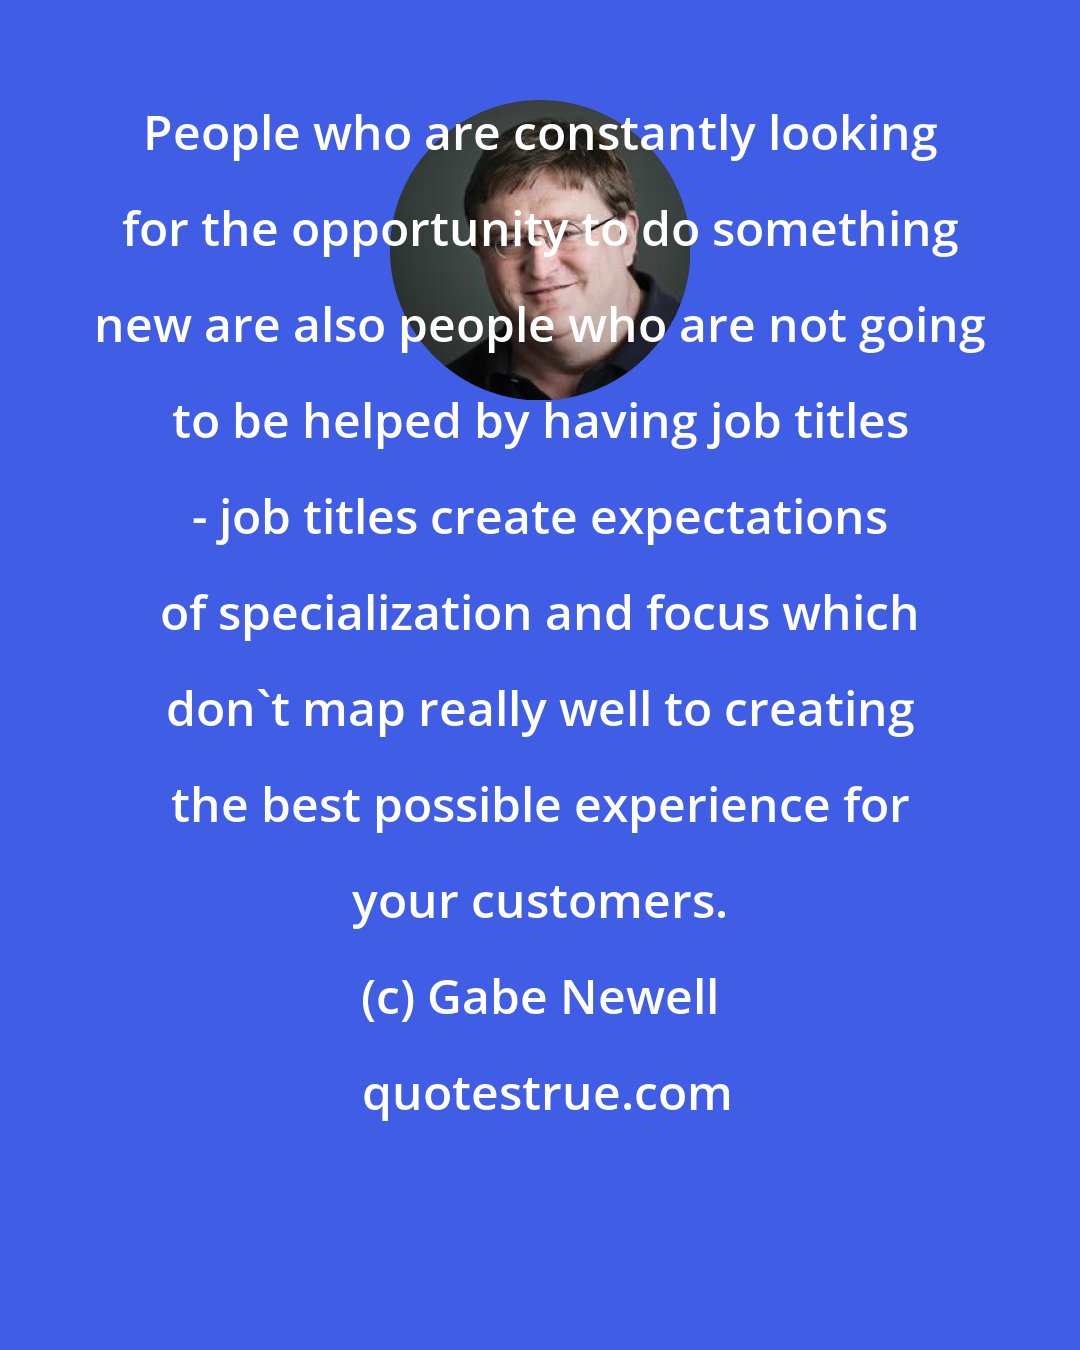 Gabe Newell: People who are constantly looking for the opportunity to do something new are also people who are not going to be helped by having job titles - job titles create expectations of specialization and focus which don't map really well to creating the best possible experience for your customers.